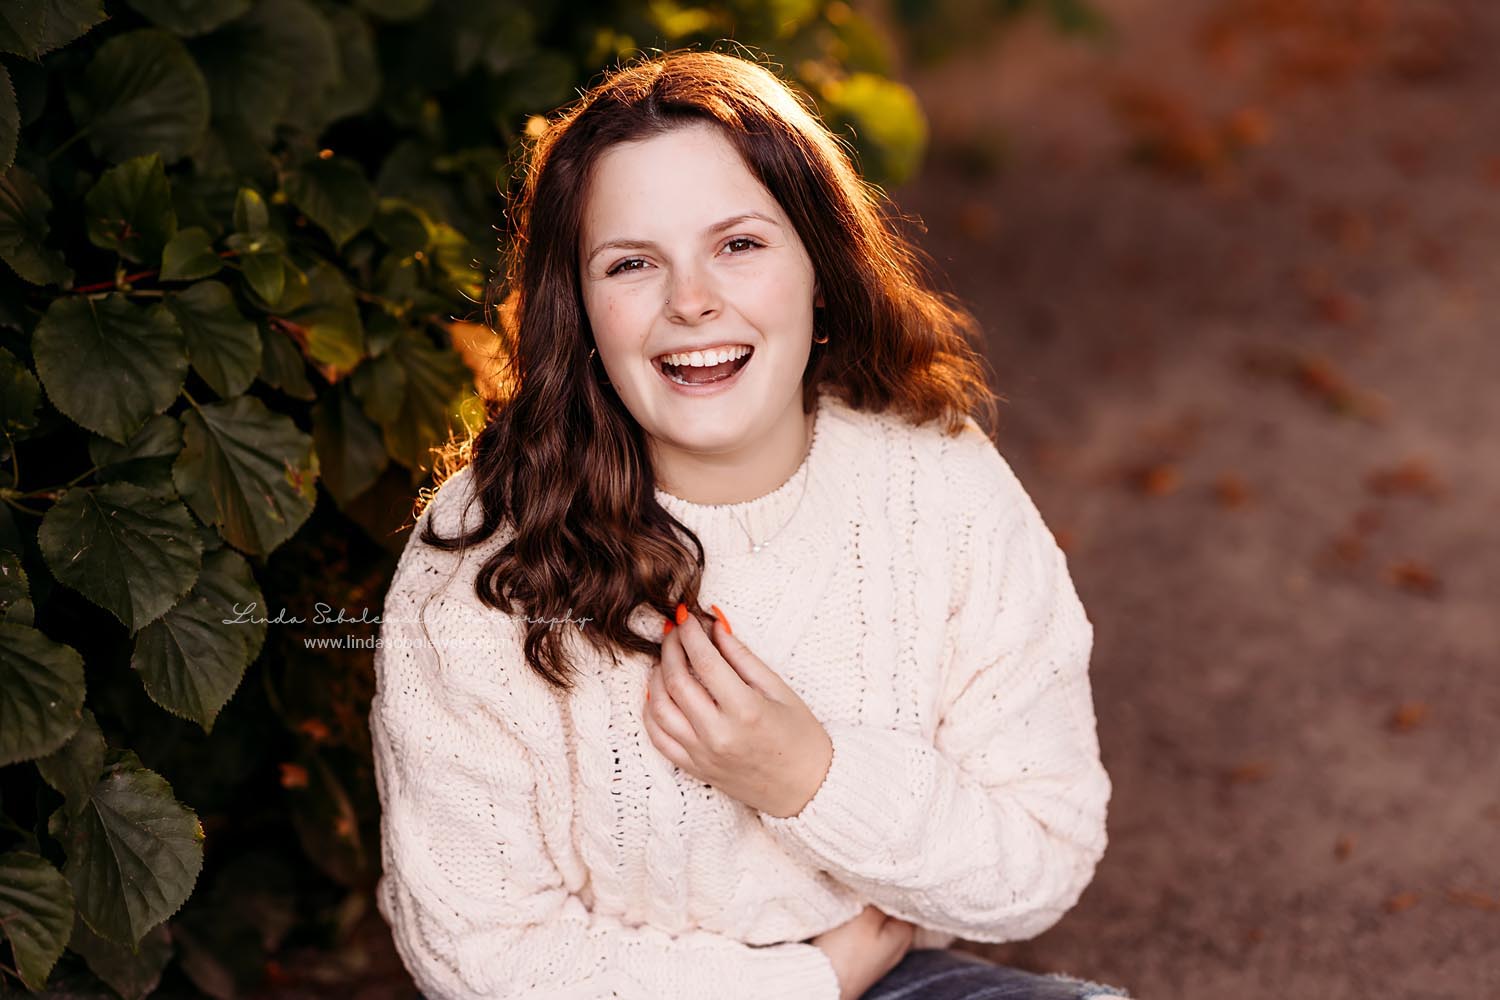 girl in white sweater sitting in the flowers, Senior girls photos at harkness memorial park